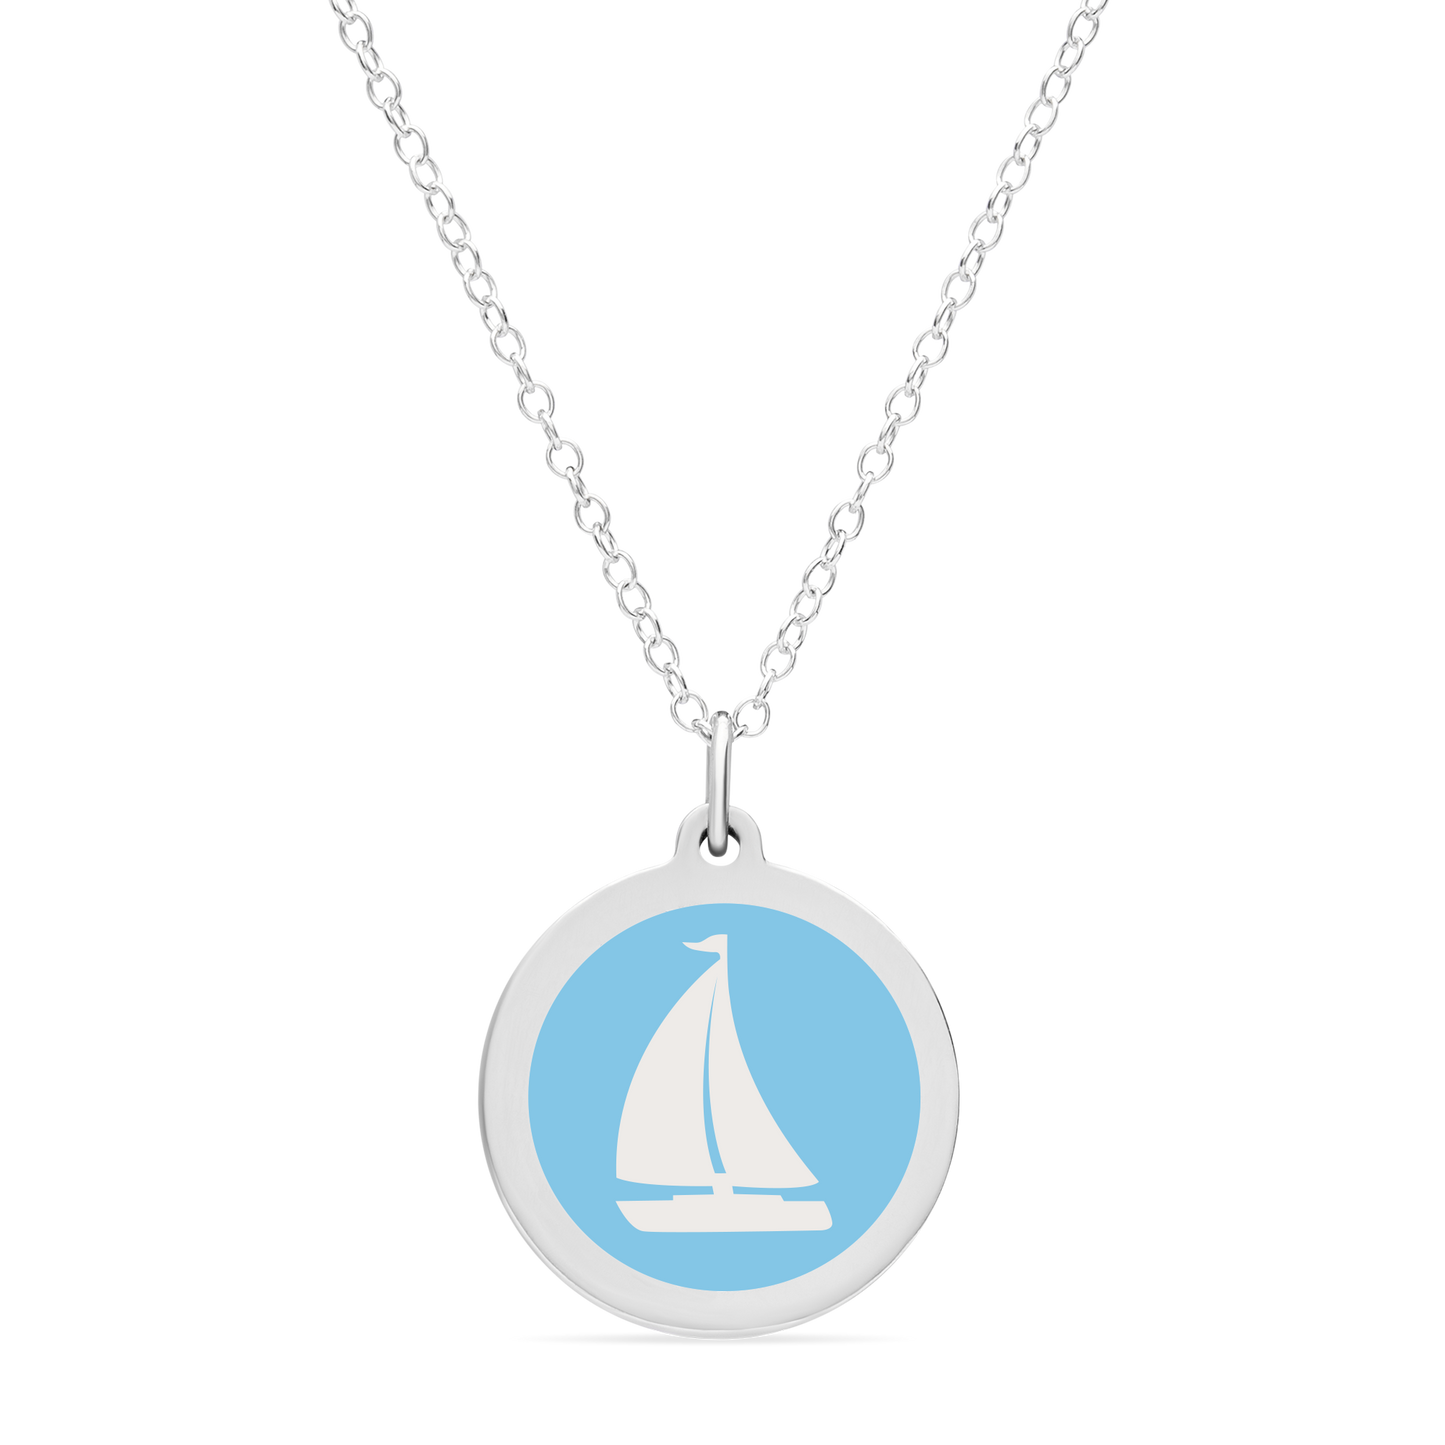 ORIGINAL SAILBOAT CHARM sterling silver with rhodium plate